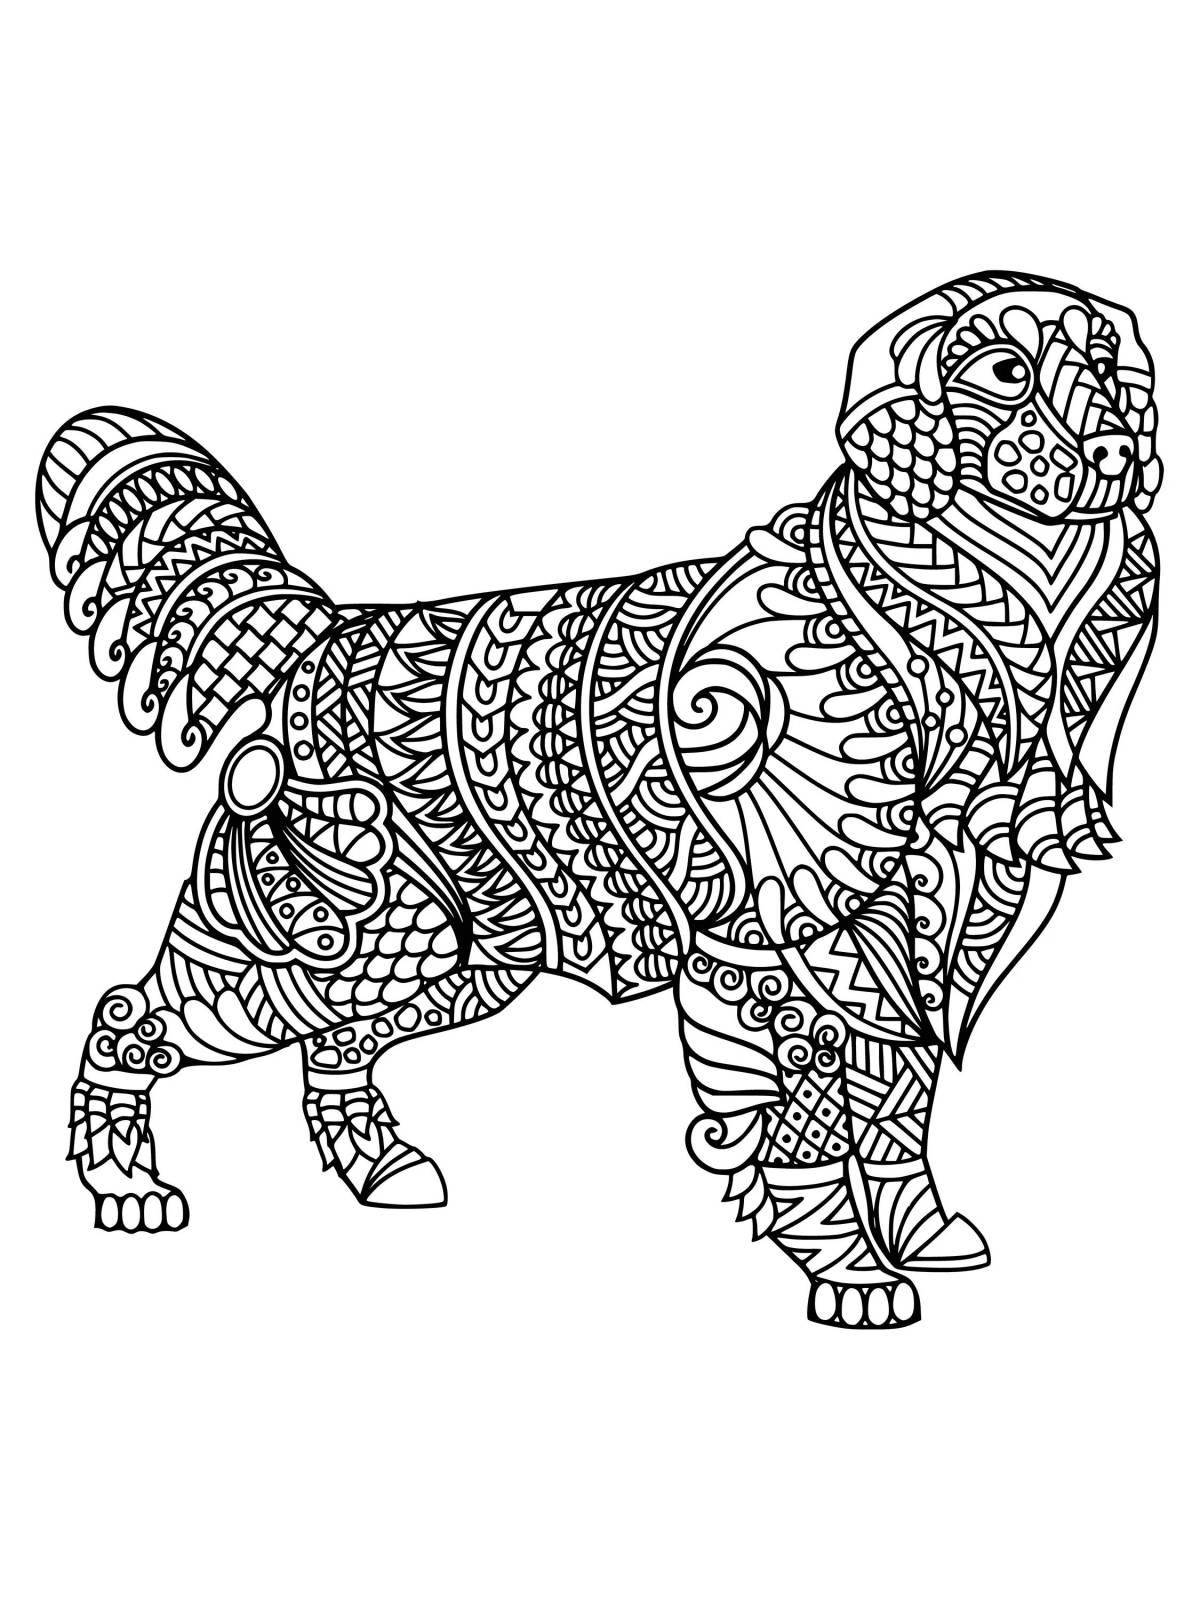 Cute patterned dog coloring page